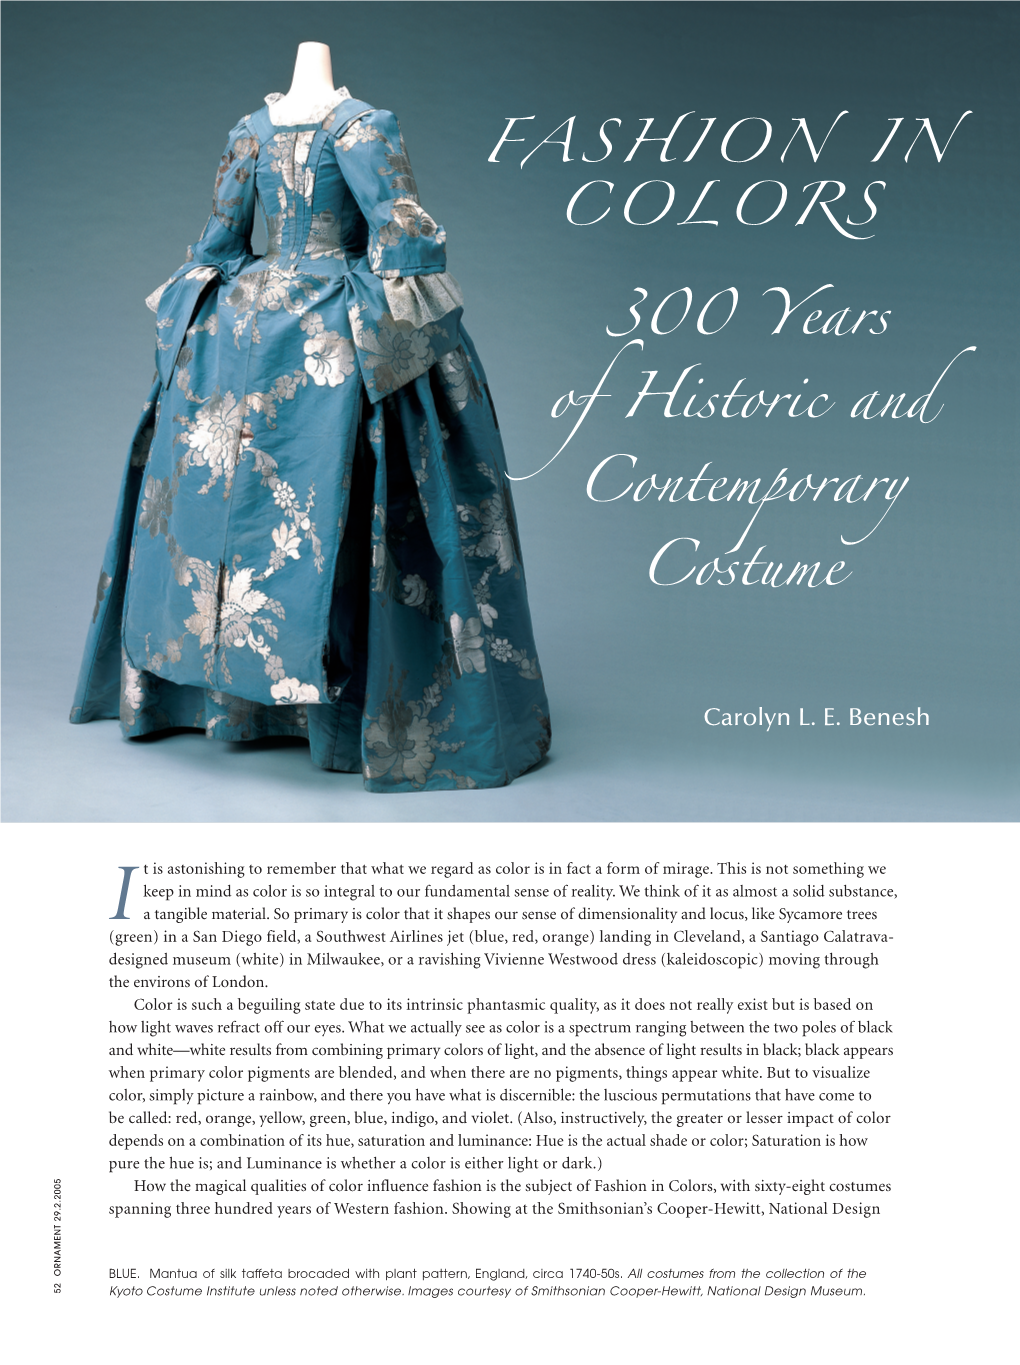 300 Years of Historic and Contemporary Costume